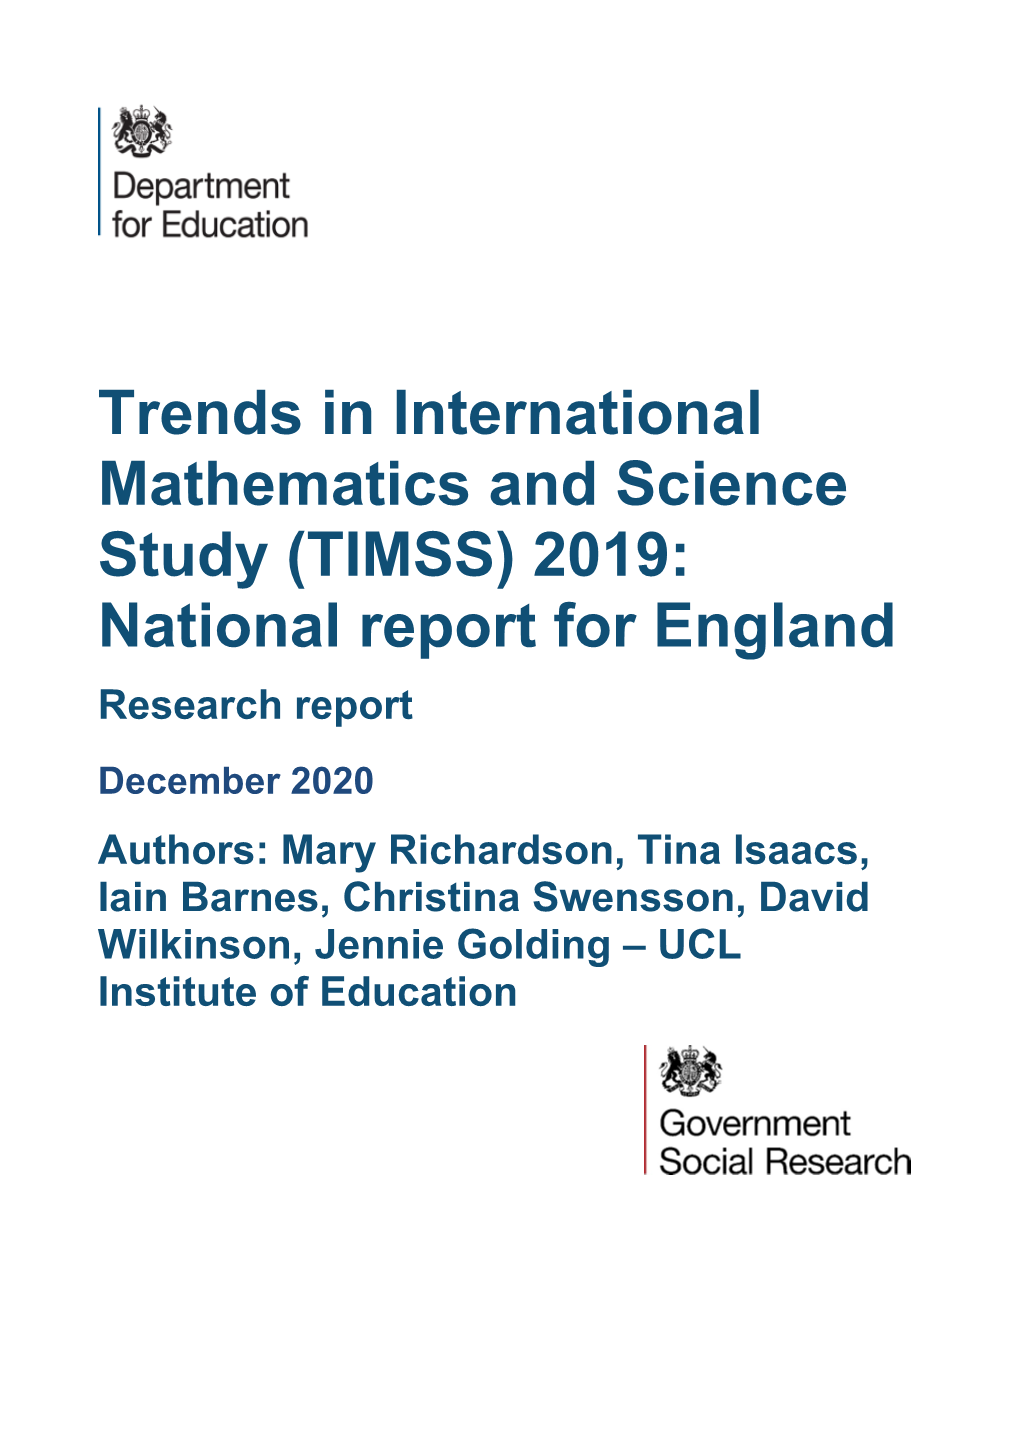 Trends in International Mathematics and Science Study (TIMSS) 2019: National Report for England Research Report